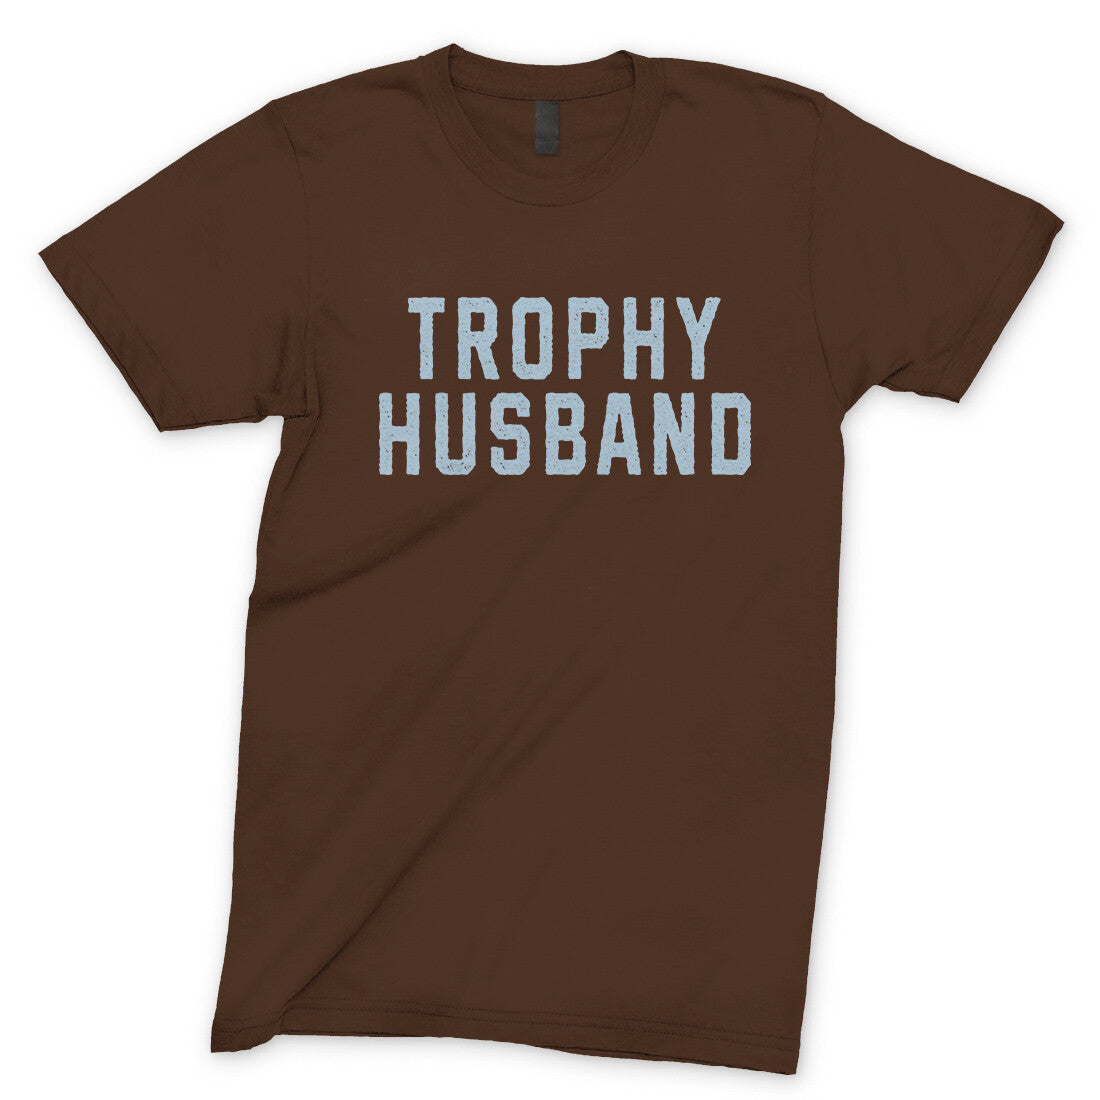 Trophy Husband in Dark Chocolate Color